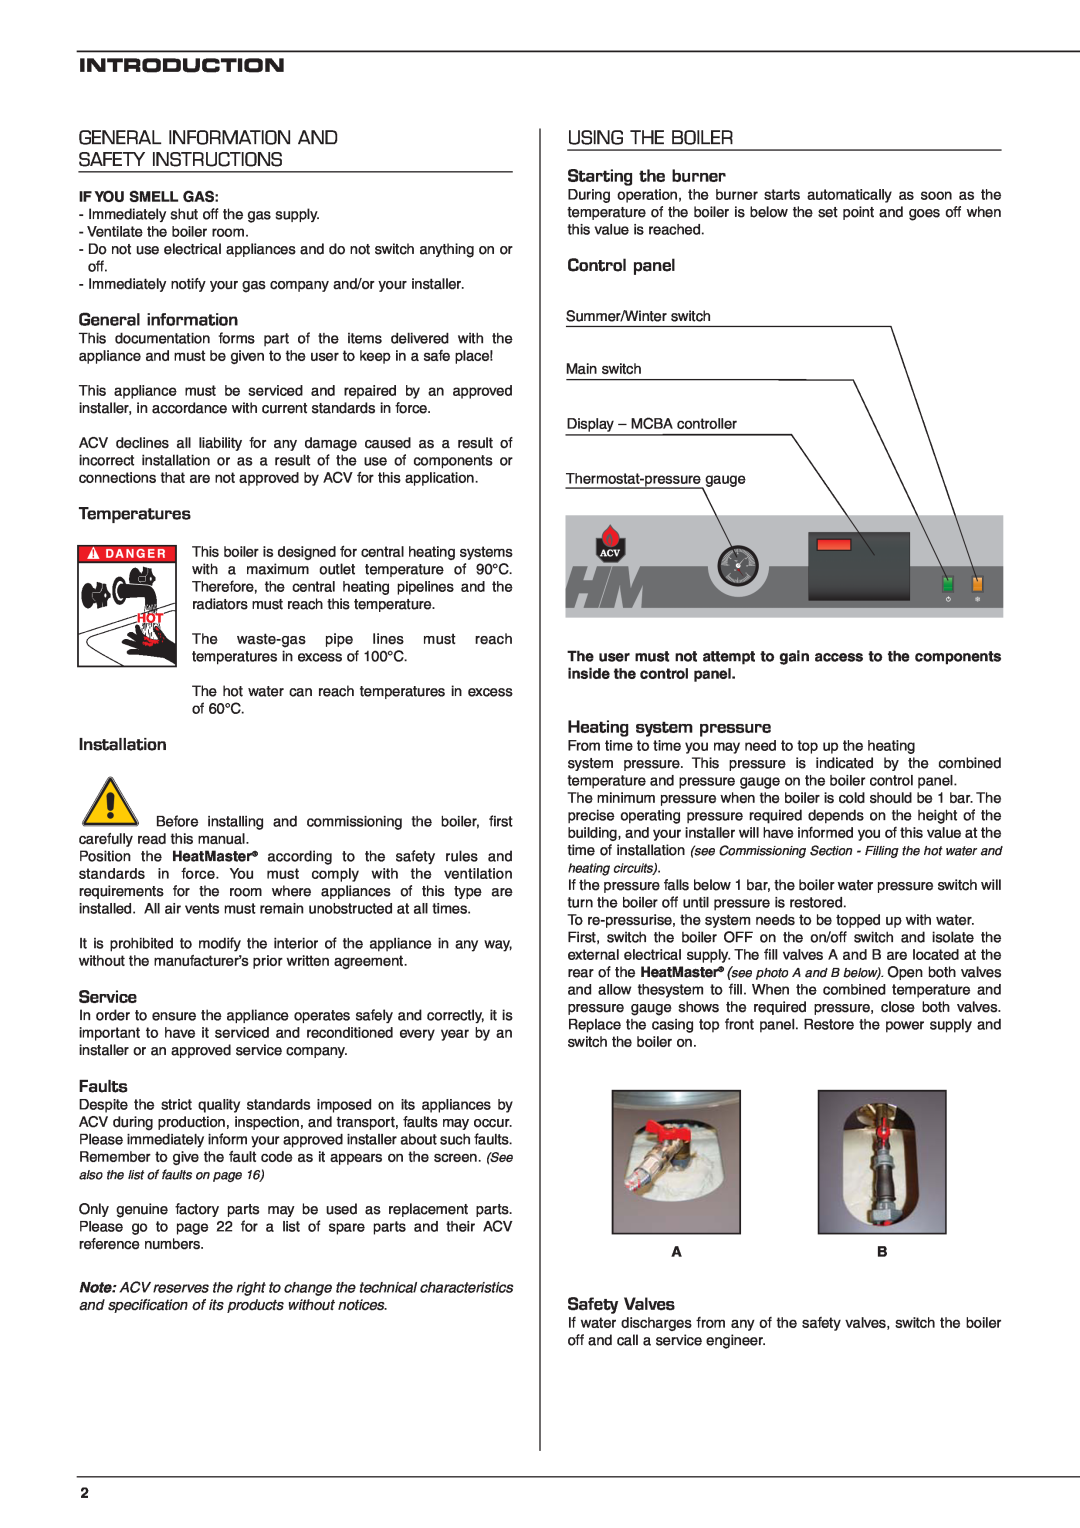 Heatmaster 201 General Information And Safety Instructions, Using The Boiler, Introduction, General information, Service 